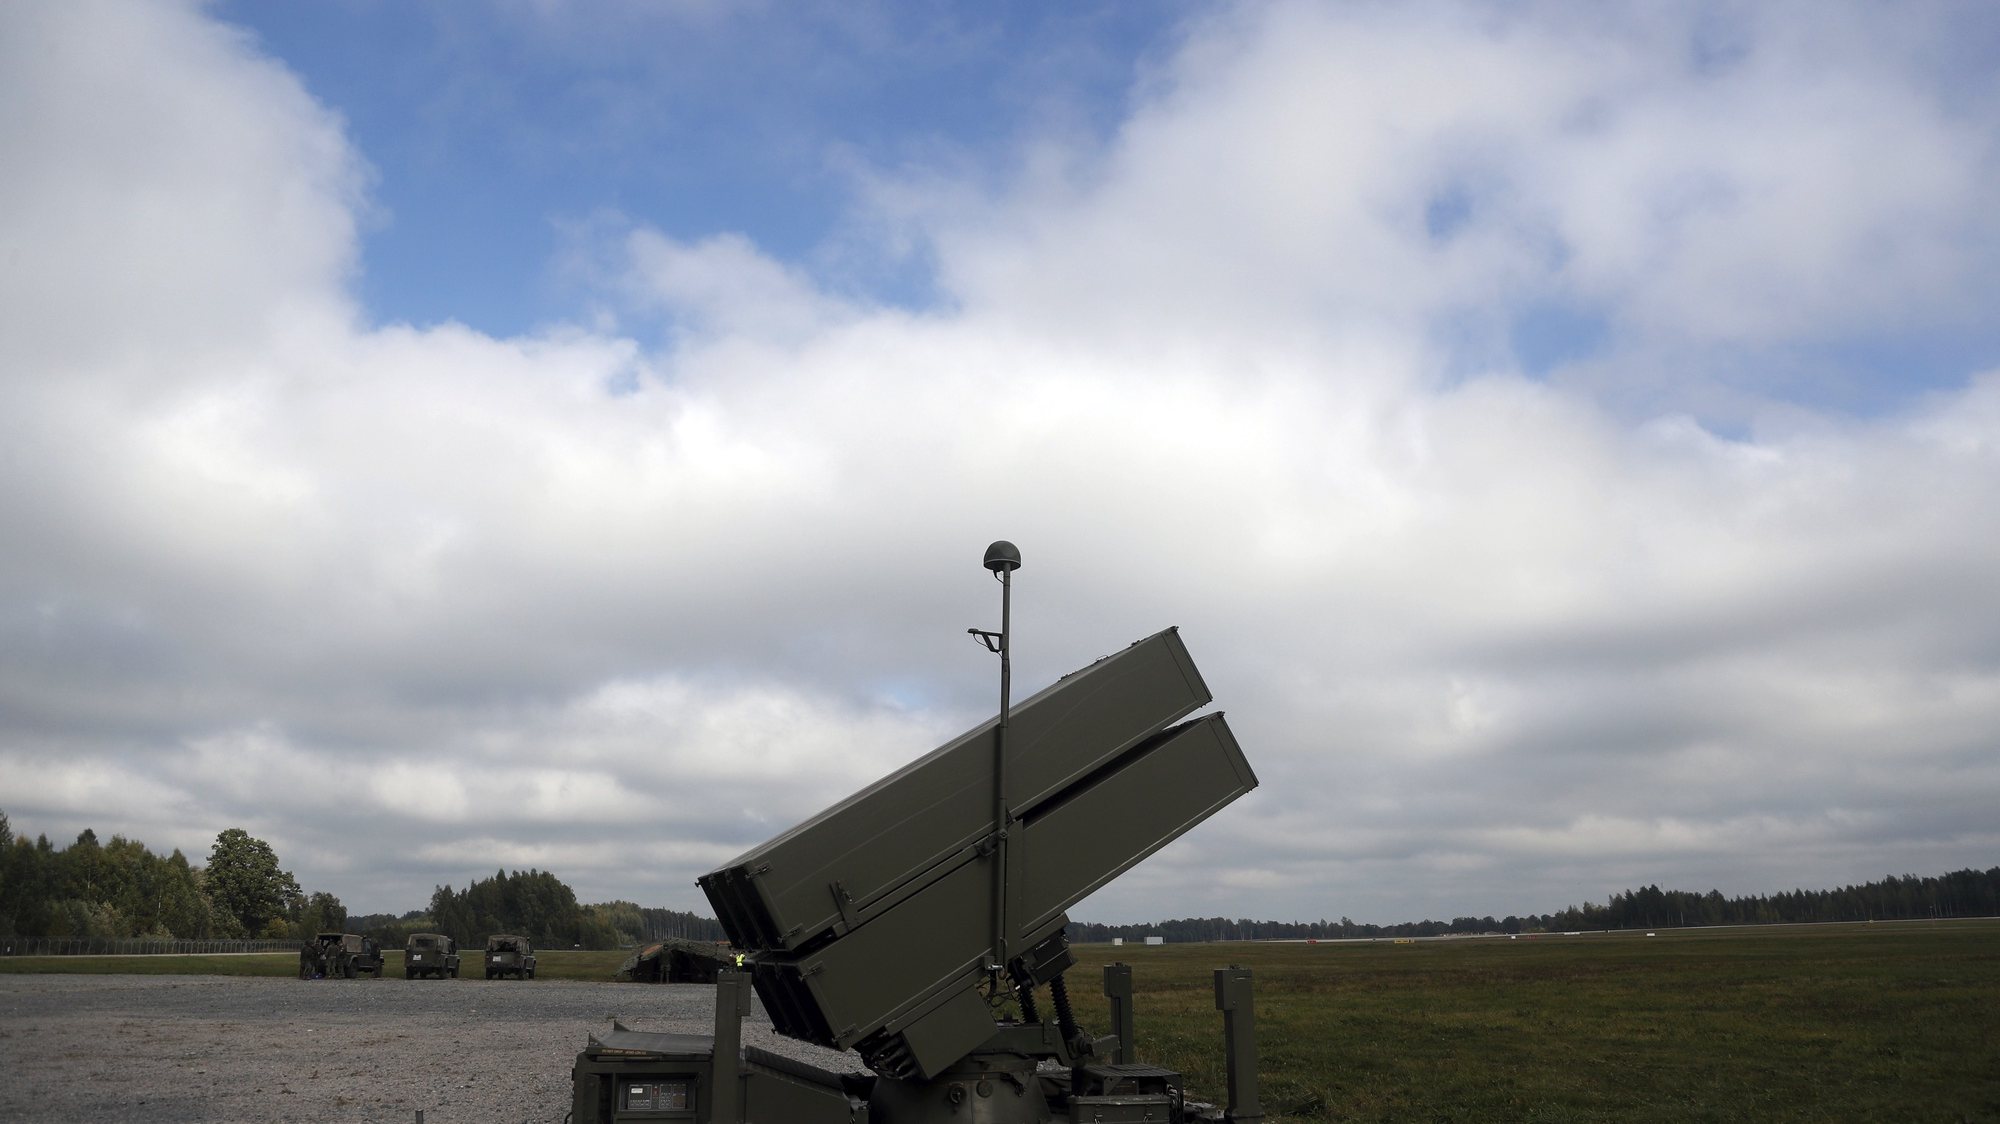 epa10209634 Spanish army air defence systems NASAMS simulates the defence during Ramstein Alloy exercise in Lielvarde Air Base, Latvia, 27 September 2022. NATO said Hungary, Germany, Czech Republic, Italy, Turkey, the United Kingdom, Estonia, Latvia and Lithuania, as well as partner Finland, will conduct the two-day third Ramstein Alloy exercise in 2022. During the exercise participating air forces flew quick reaction alert drills including Communication Loss, Slow Mover Intercept, Dissimilar Air Combat Training, Combat Search and Rescue, Close Air Support and Air-to-Air Refuelling scenarios. One special focus was on the integration of a Spanish Ground Based Air Defense Task Force into the activities. Spanish NASAMS air defence systems simulated the defence of Lielvarde Air Base against aerial attack.  EPA/TOMS KALNINS